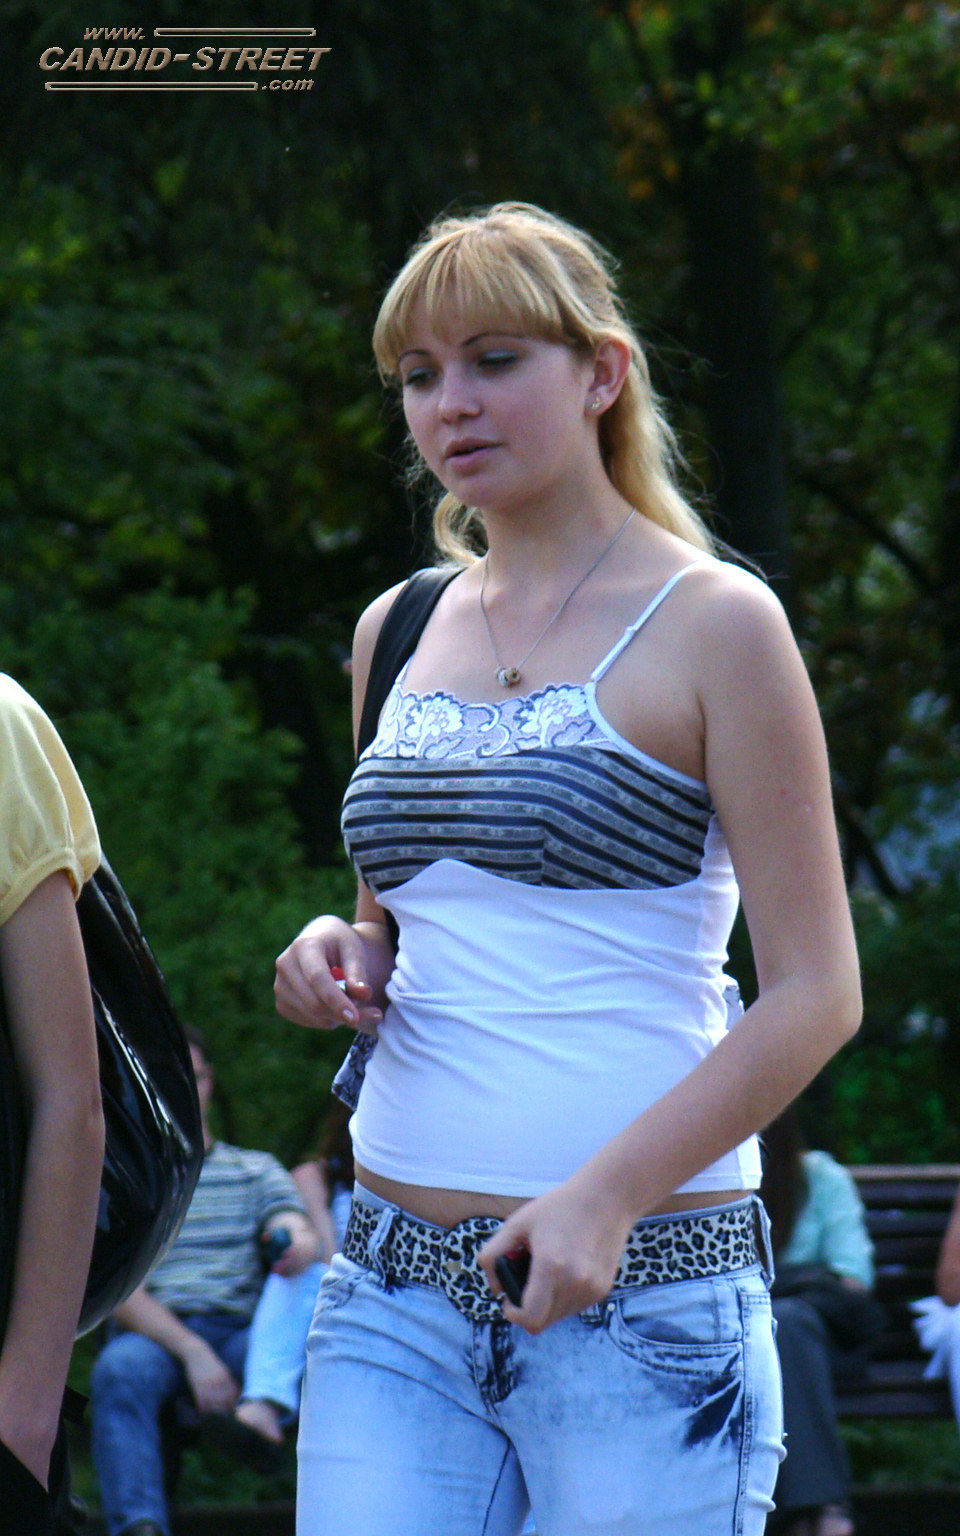 Busty girls candid shots - 09-dsc06438 from Candid Street